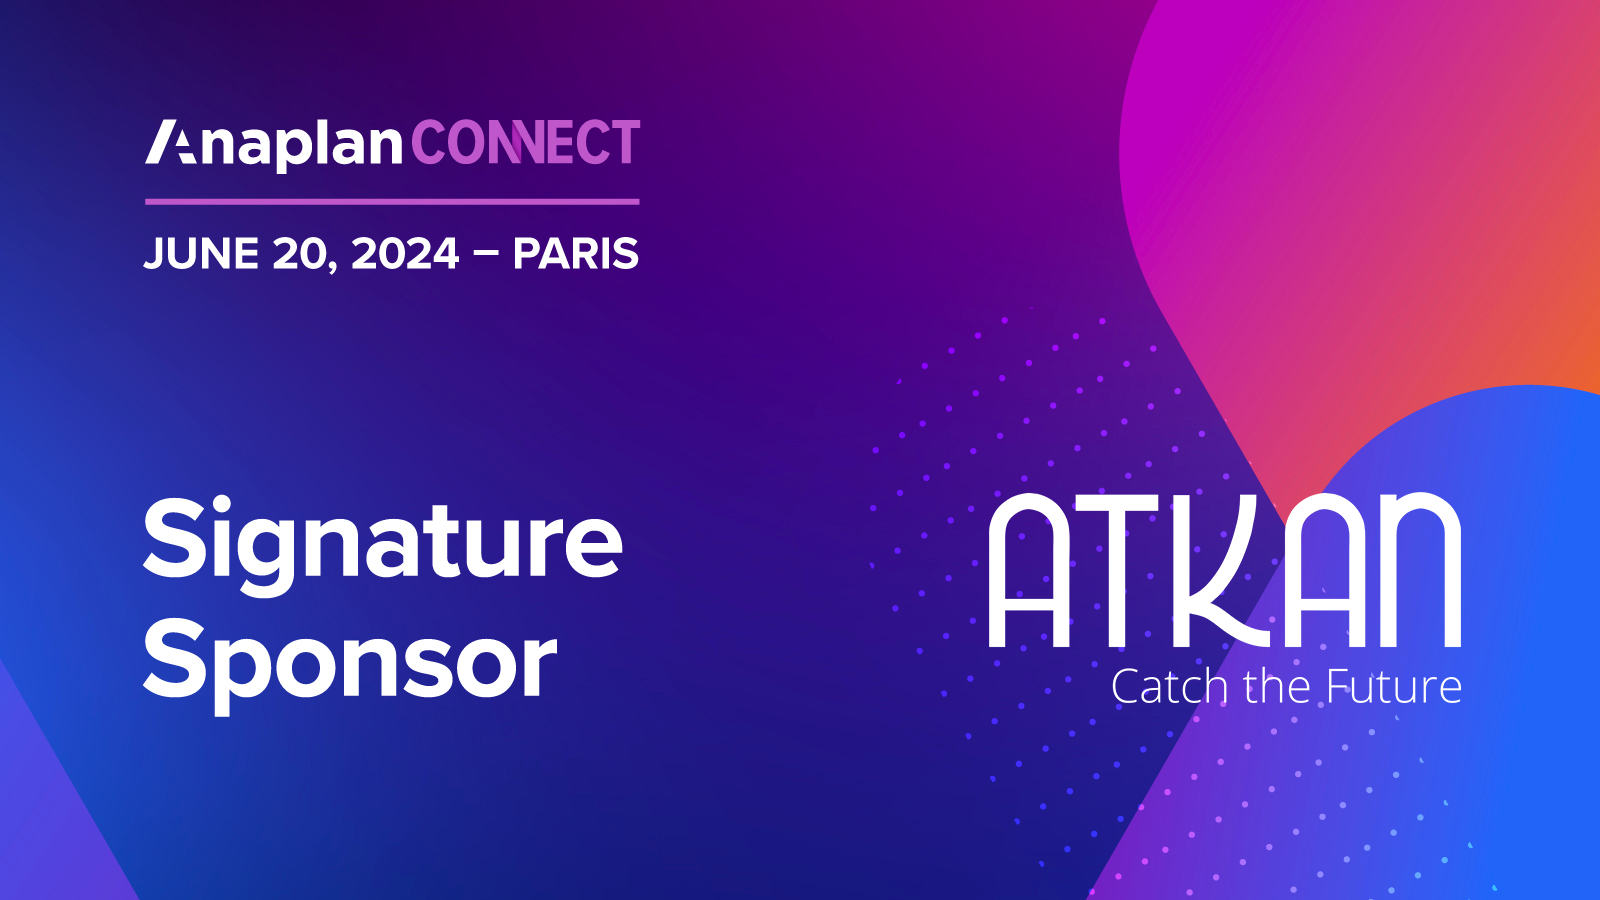 Anaplan Connect 2024